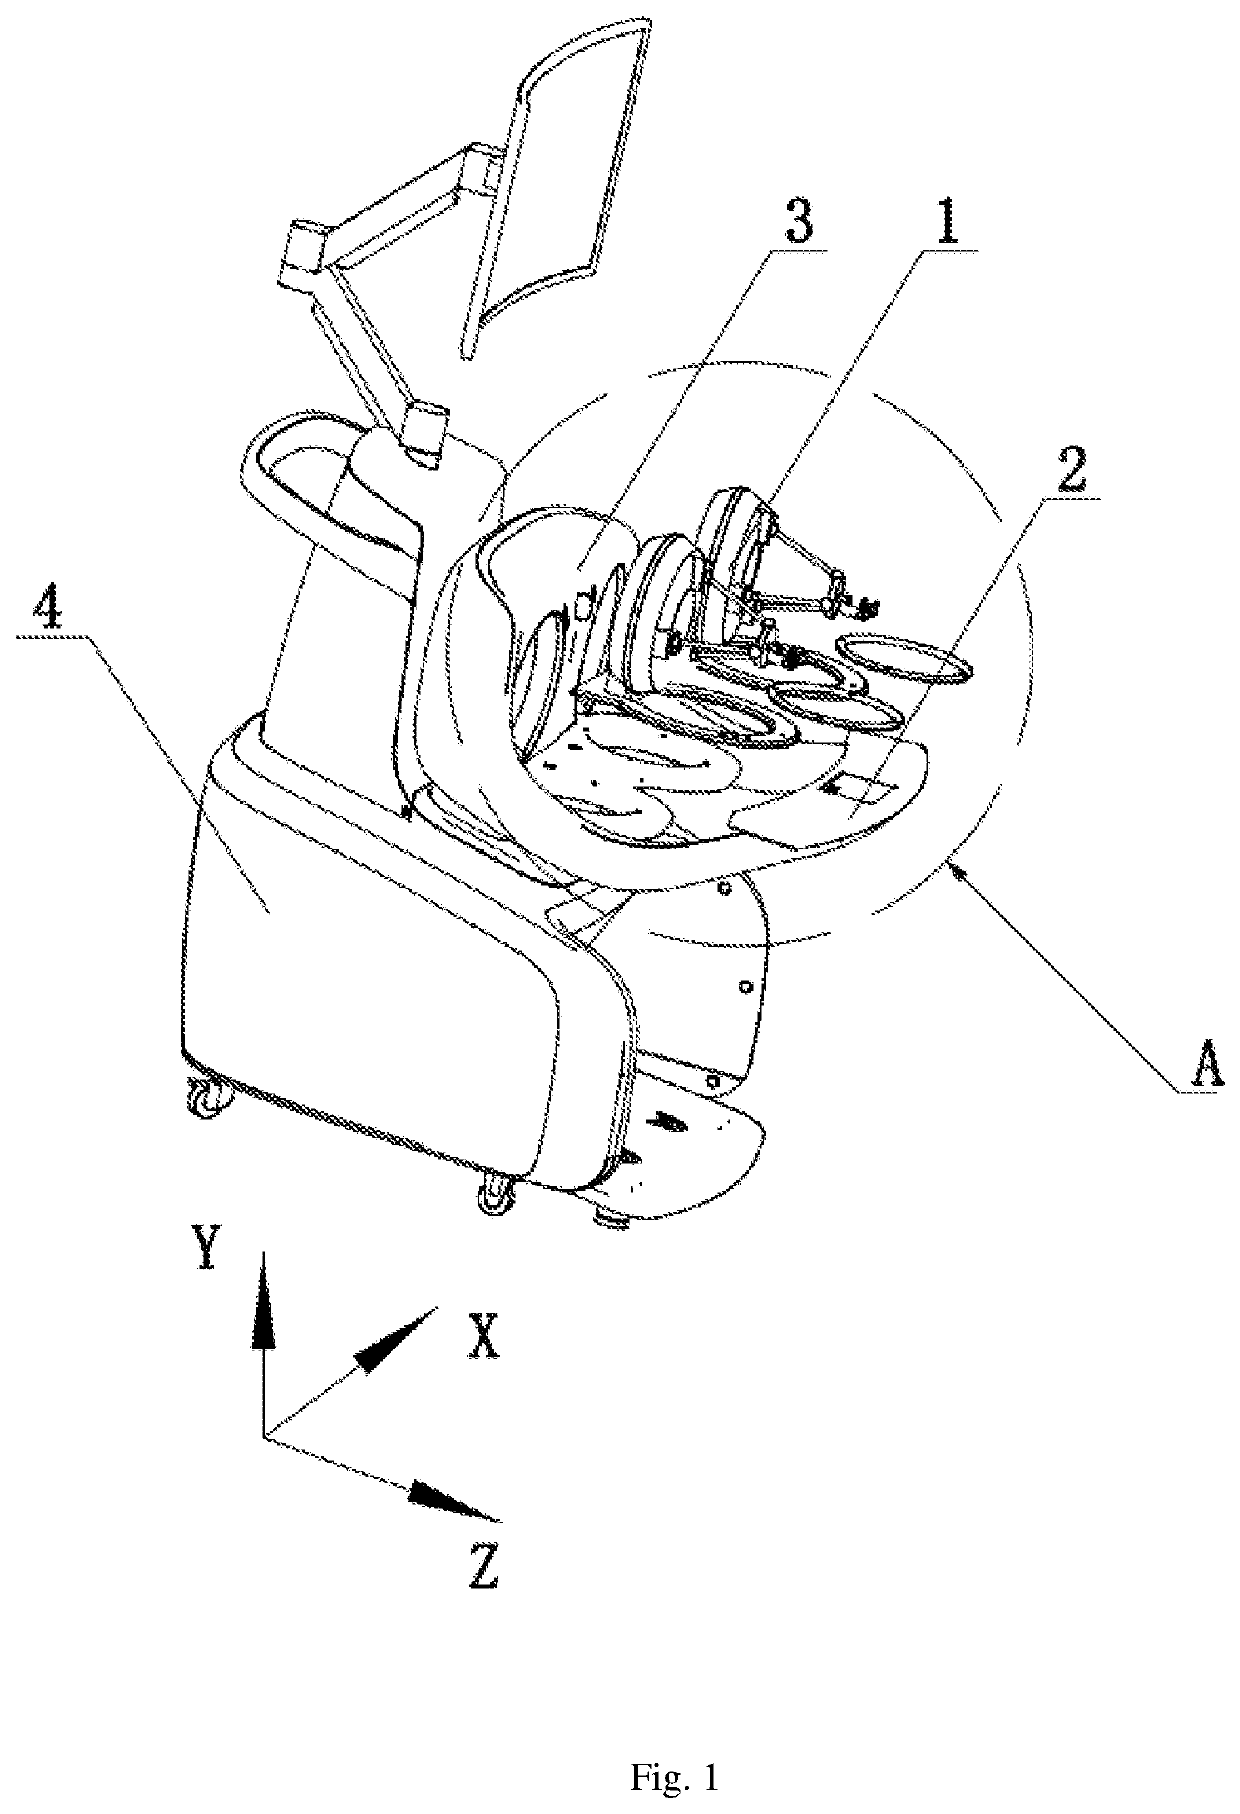 Console for operating actuating mechanism